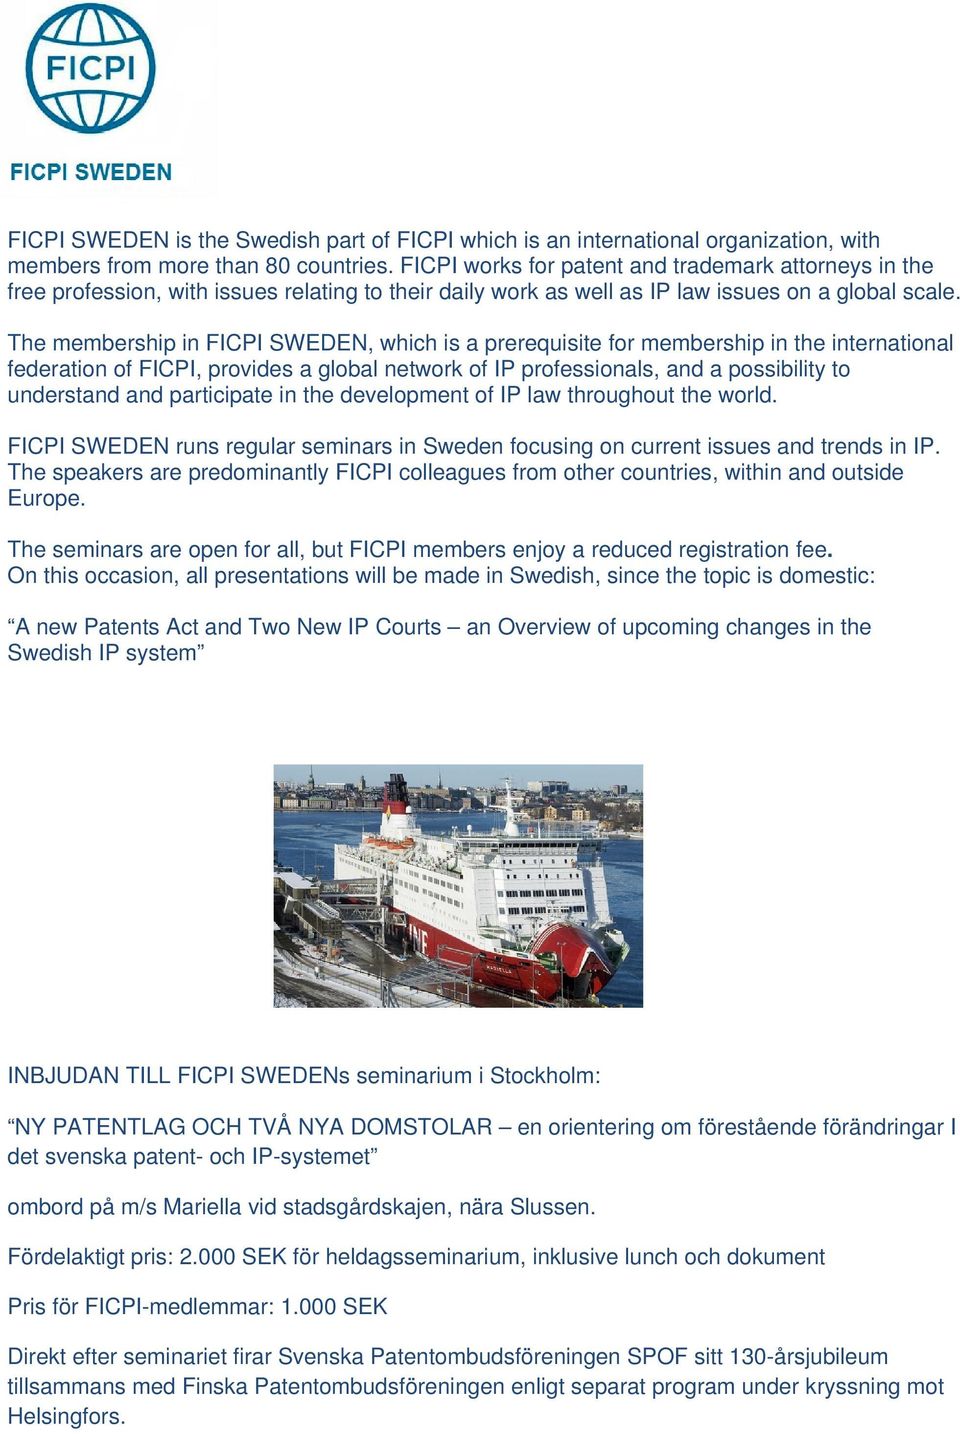 The membership in FICPI SWEDEN, which is a prerequisite for membership in the international federation of FICPI, provides a global network of IP professionals, and a possibility to understand and